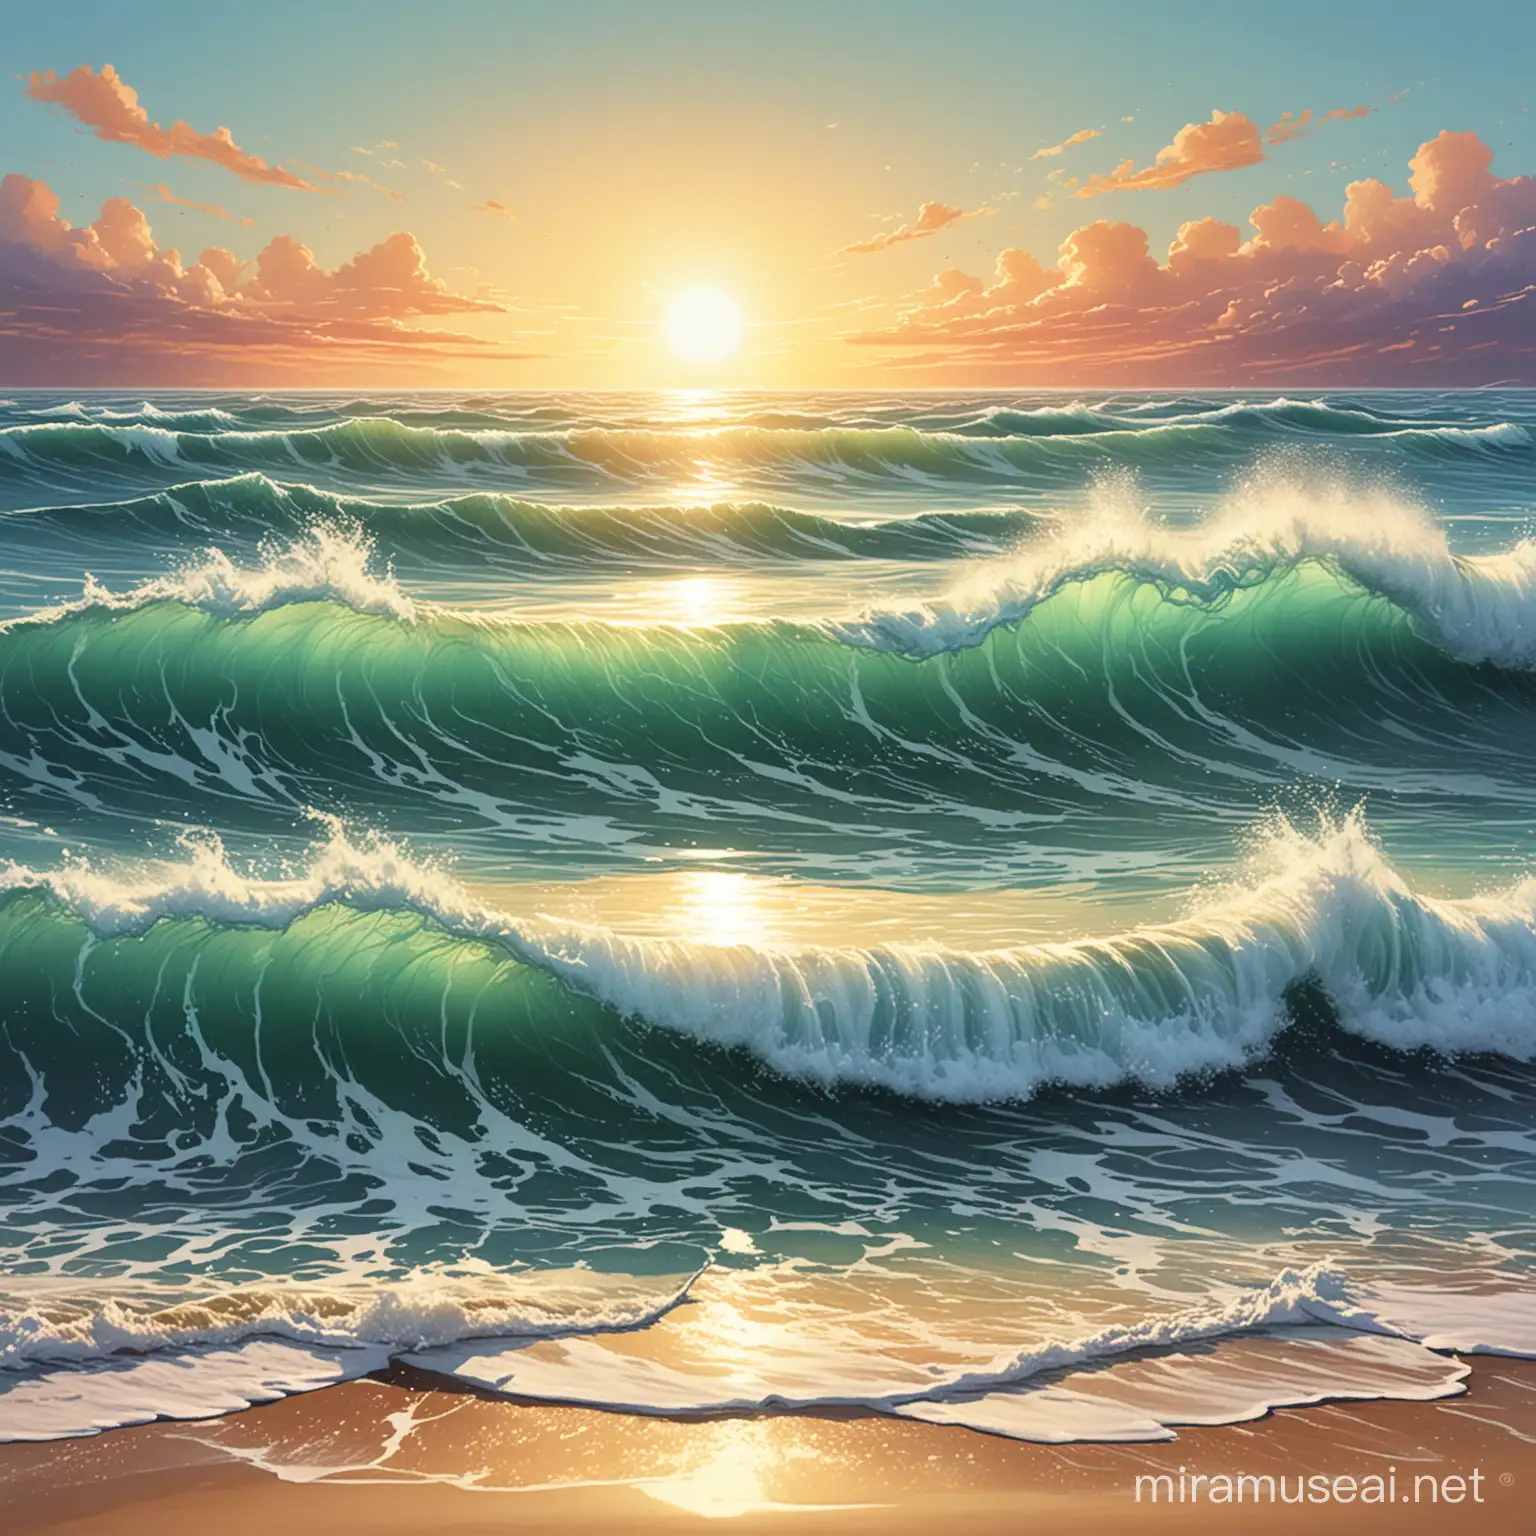 light waves turning into ocean waves. color sketch art style

